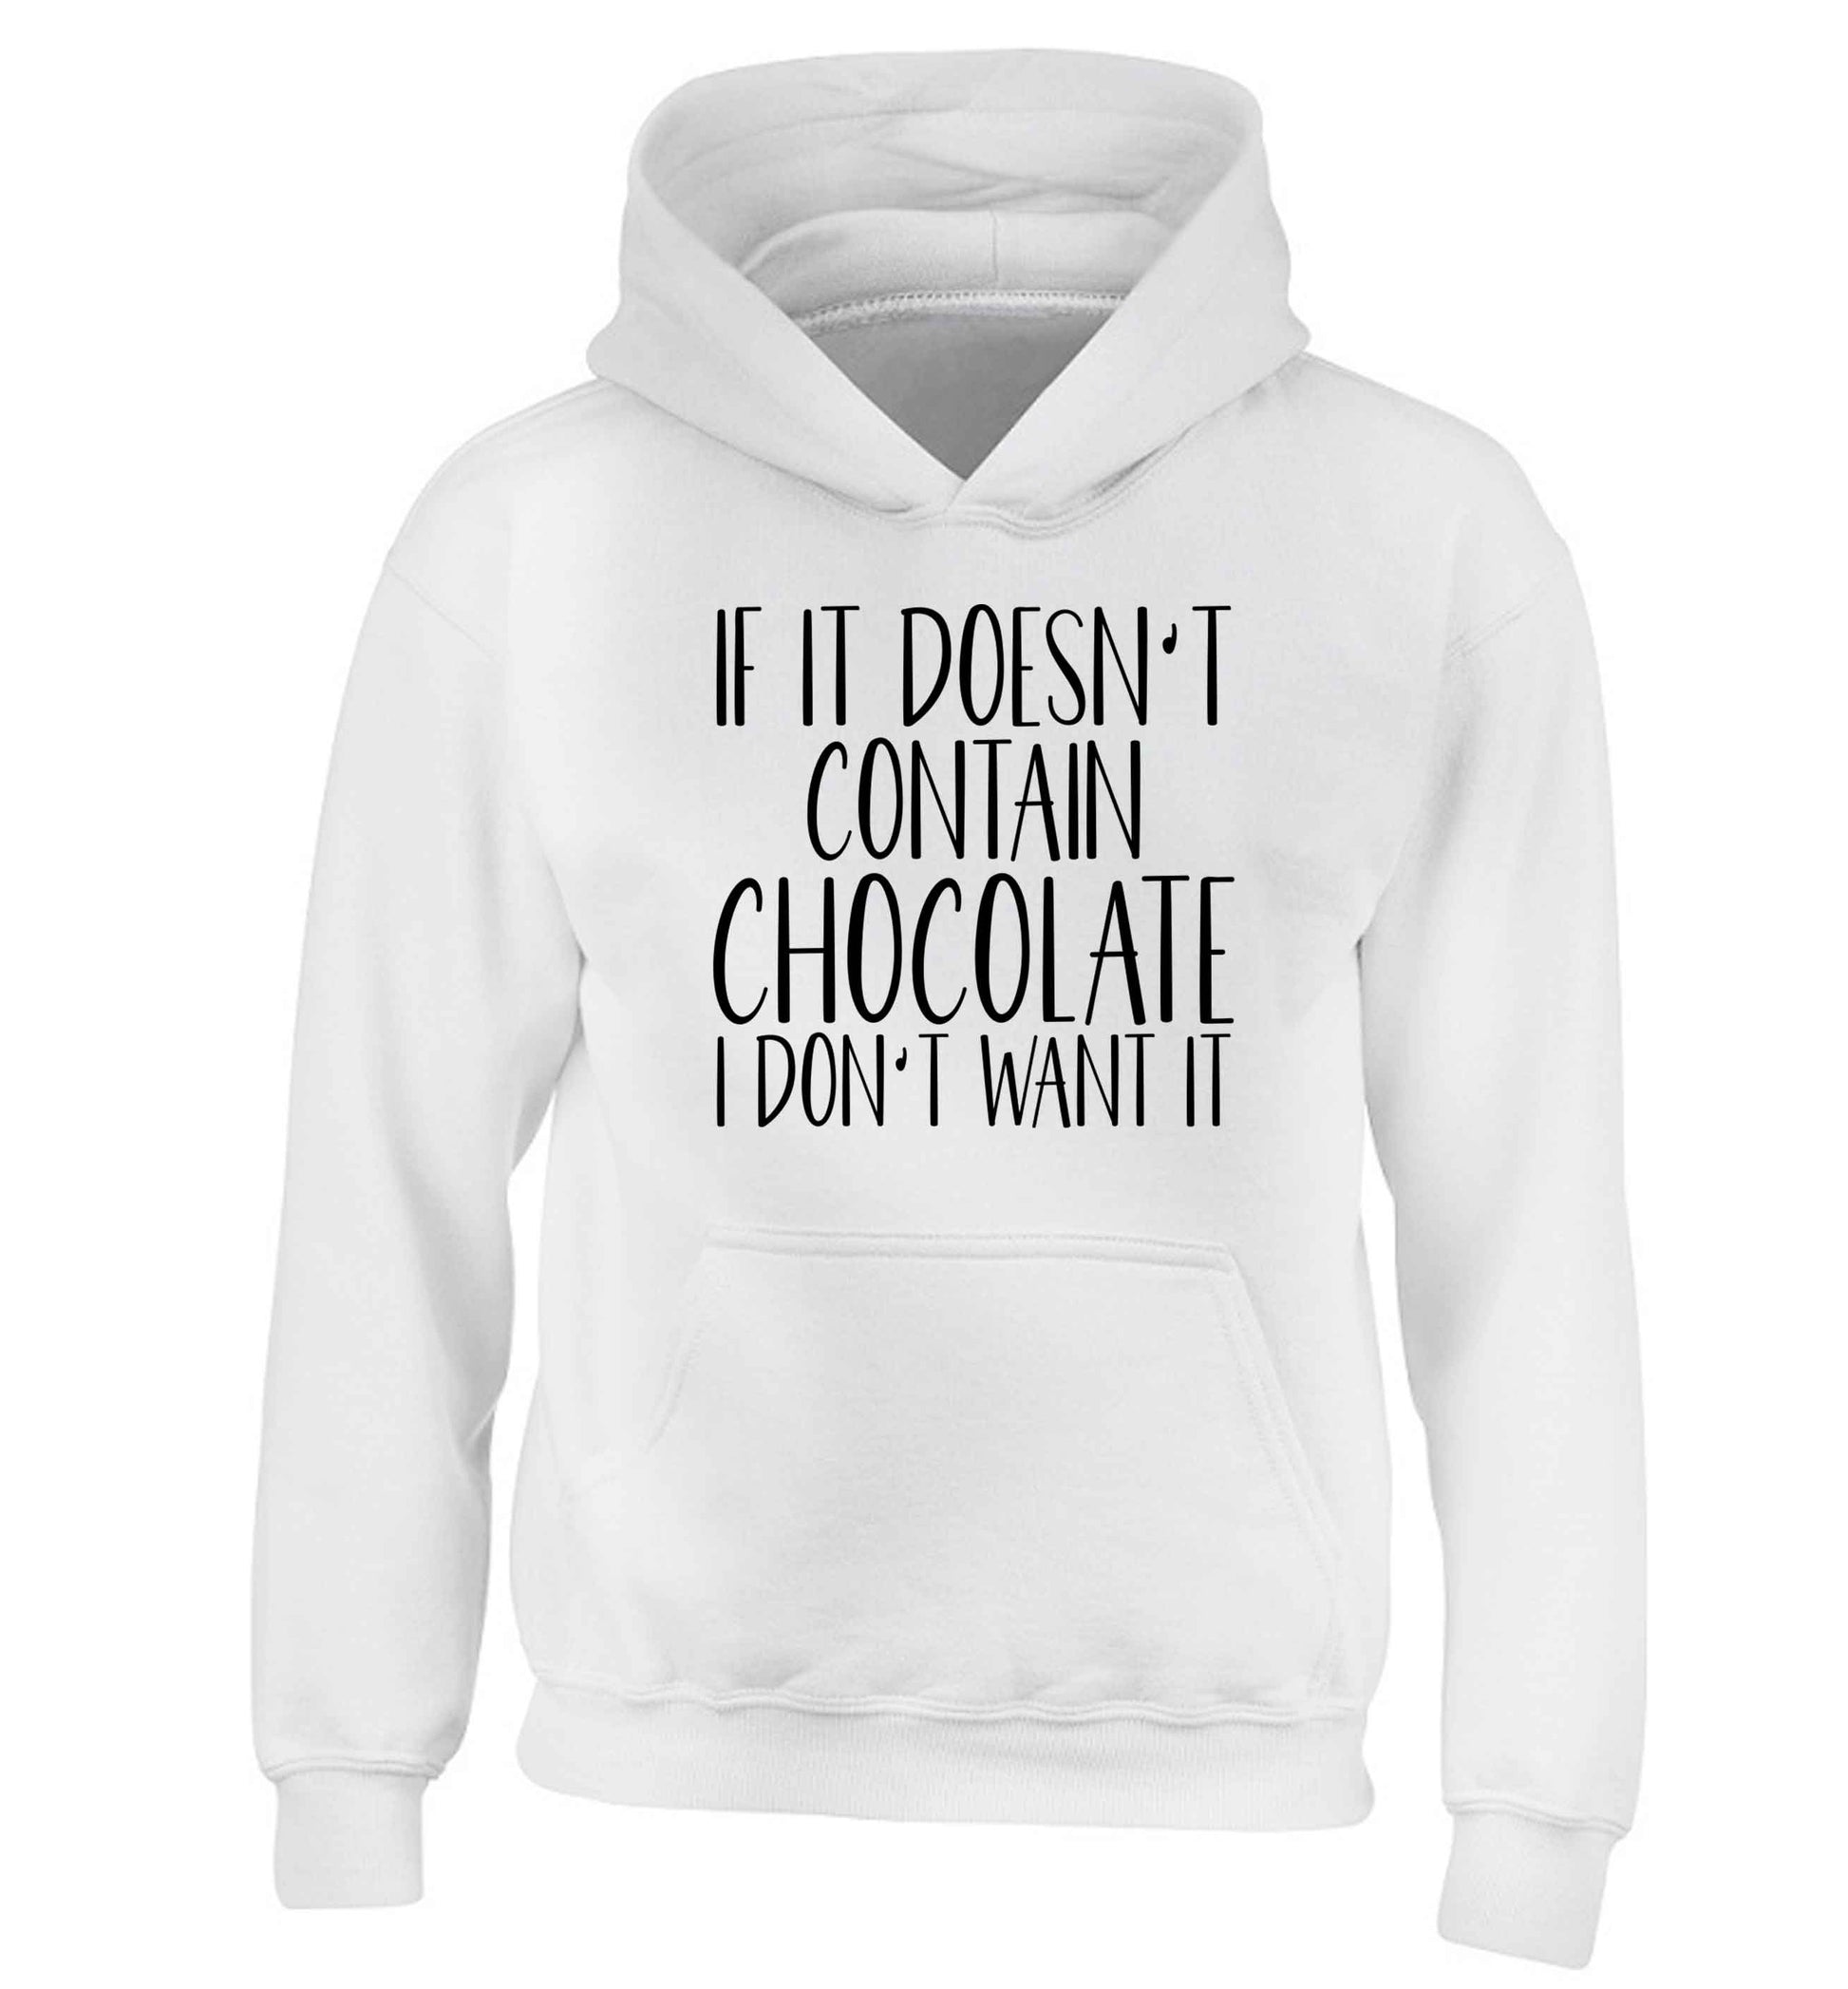 If it doesn't contain chocolate I don't want it children's white hoodie 12-13 Years